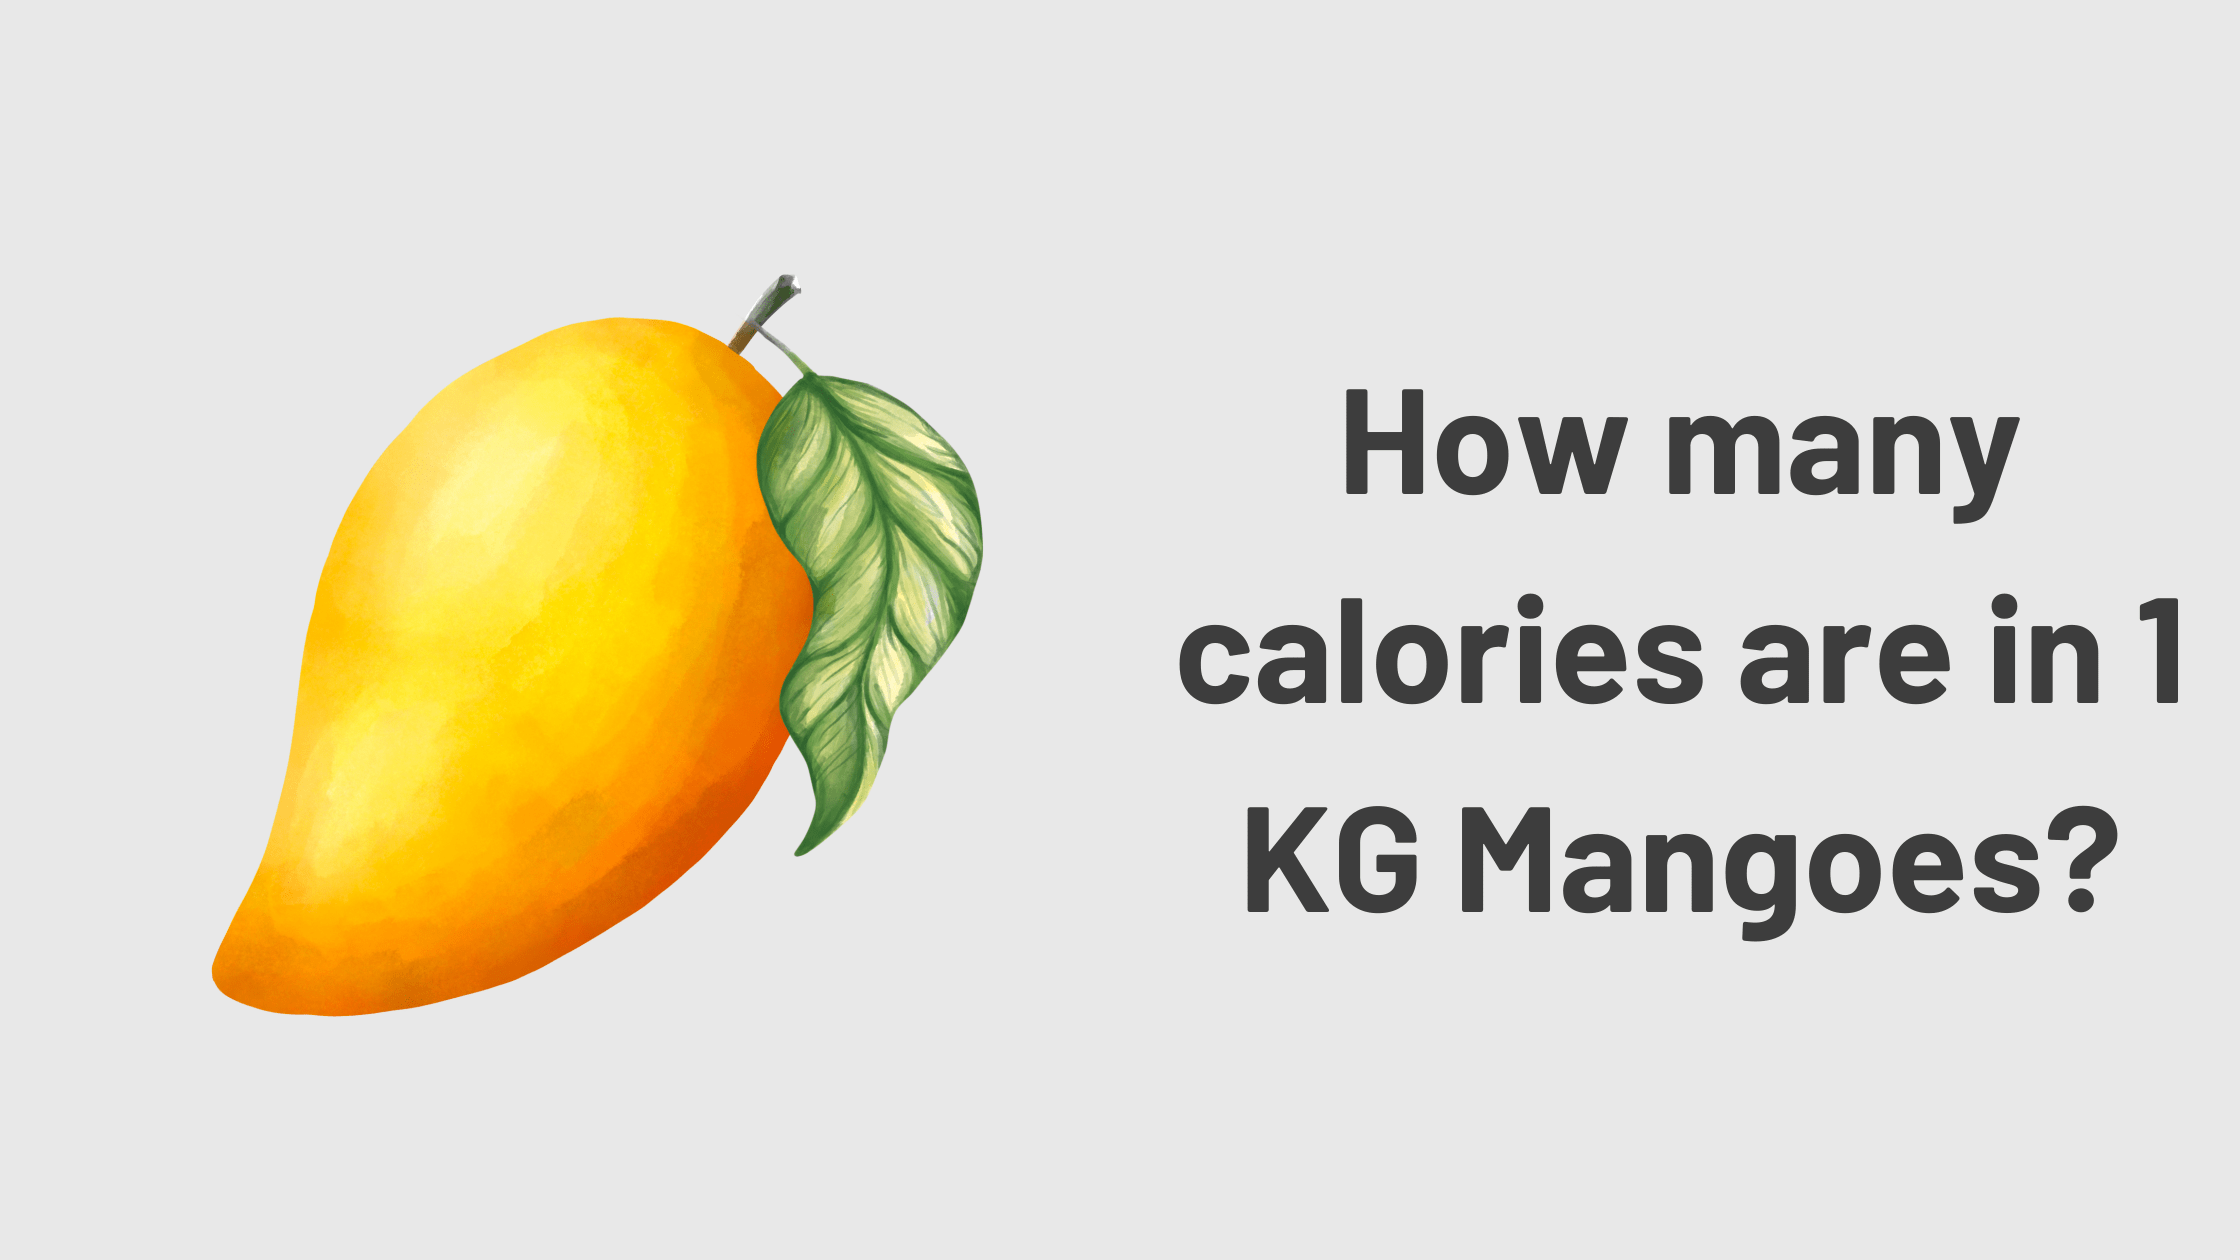 How many calories are in 1 KG Mangoes?